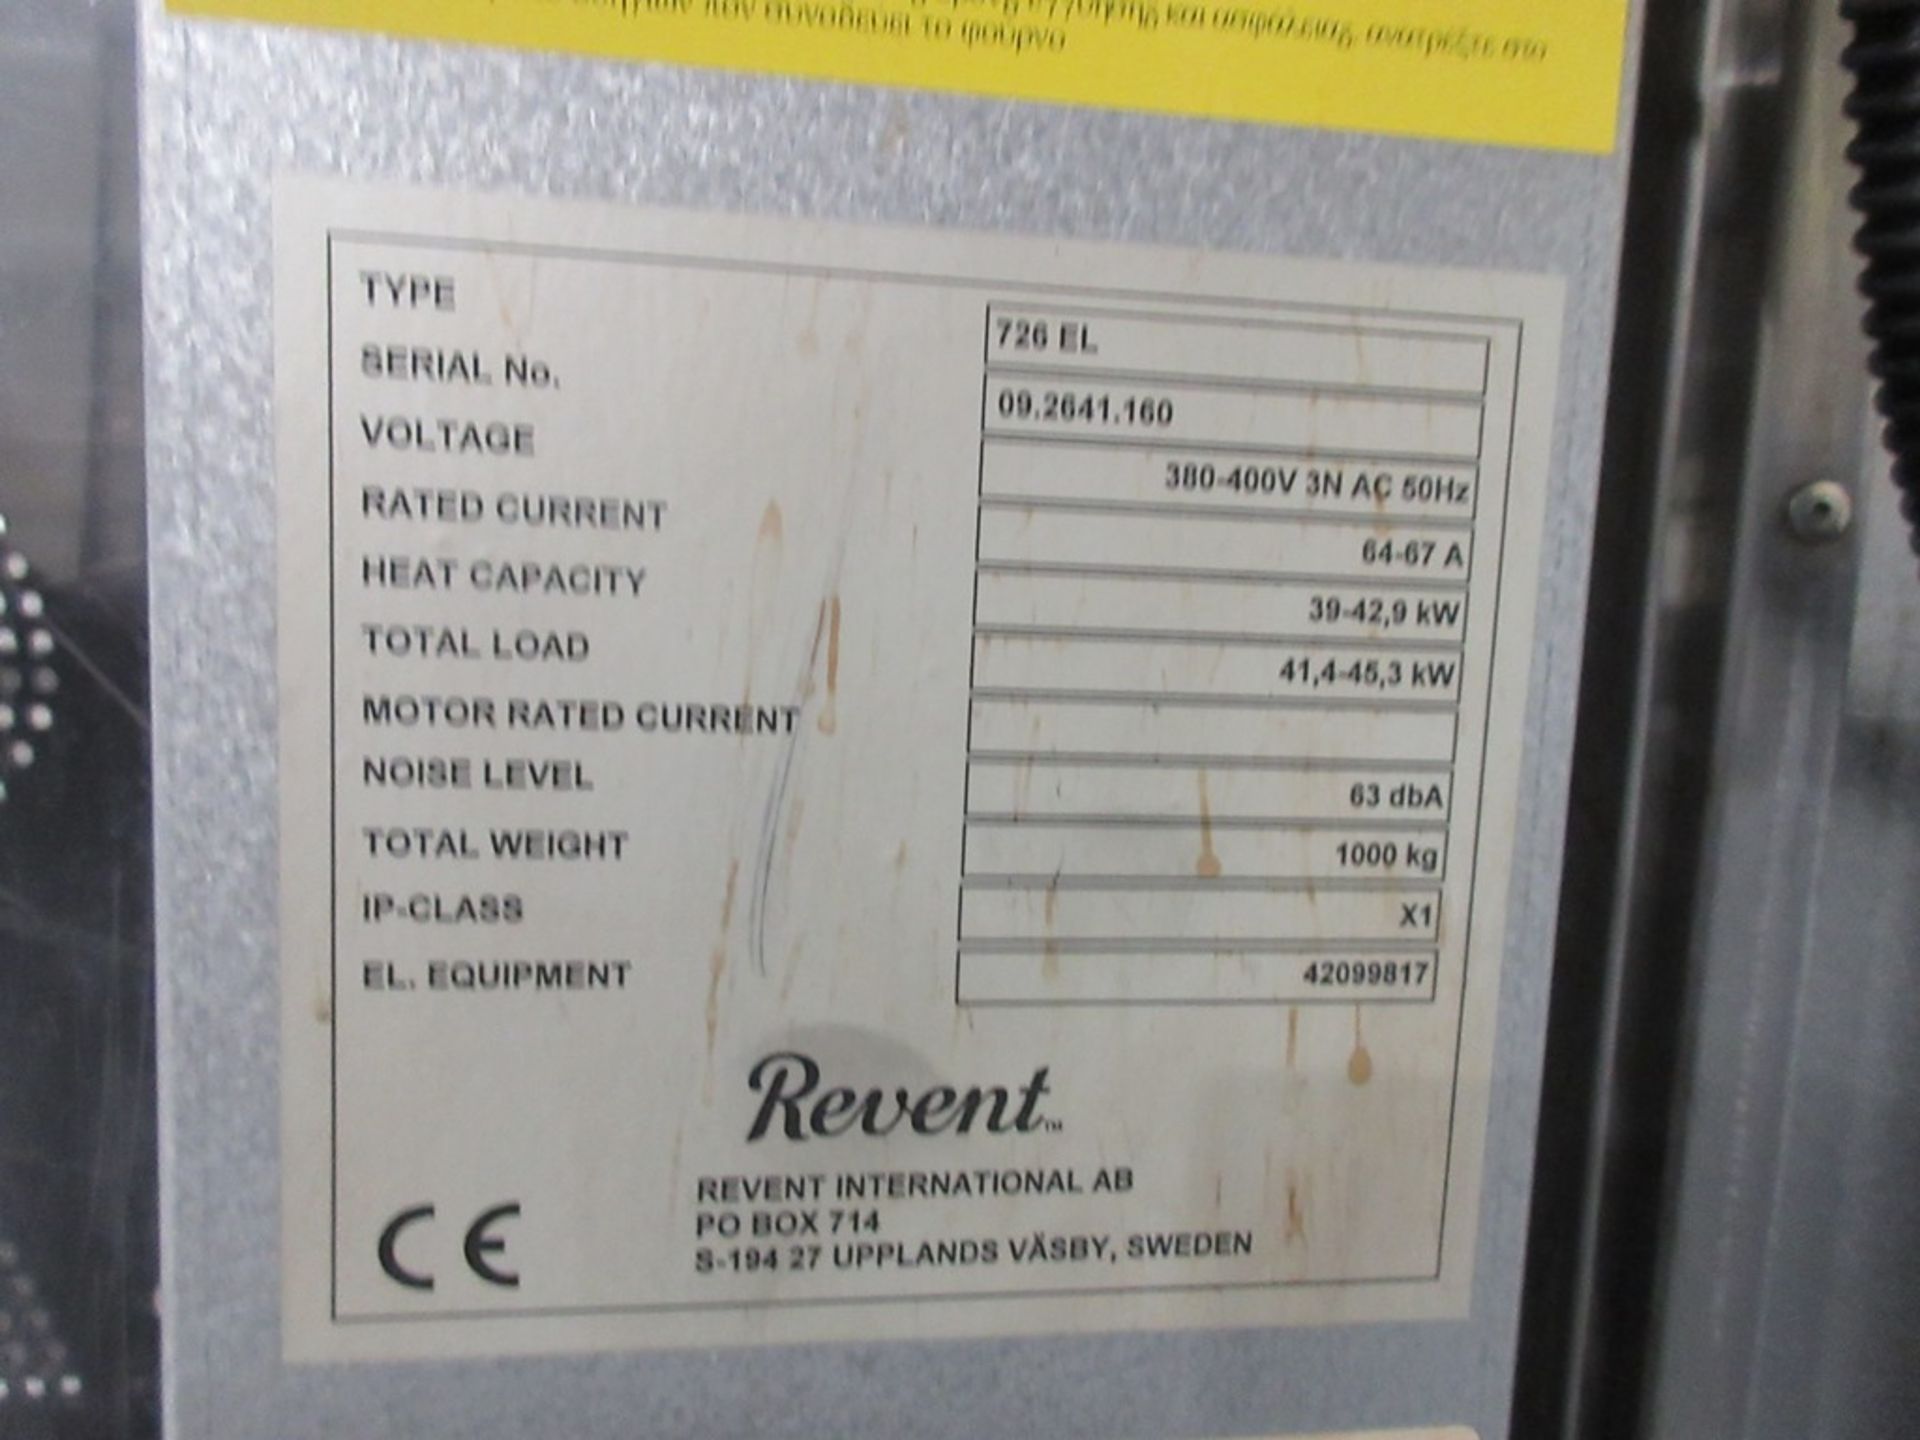 Revent stainless steel electric single rack rotary oven, type 726 EL, serial no. 09.2641.160, - Image 4 of 10